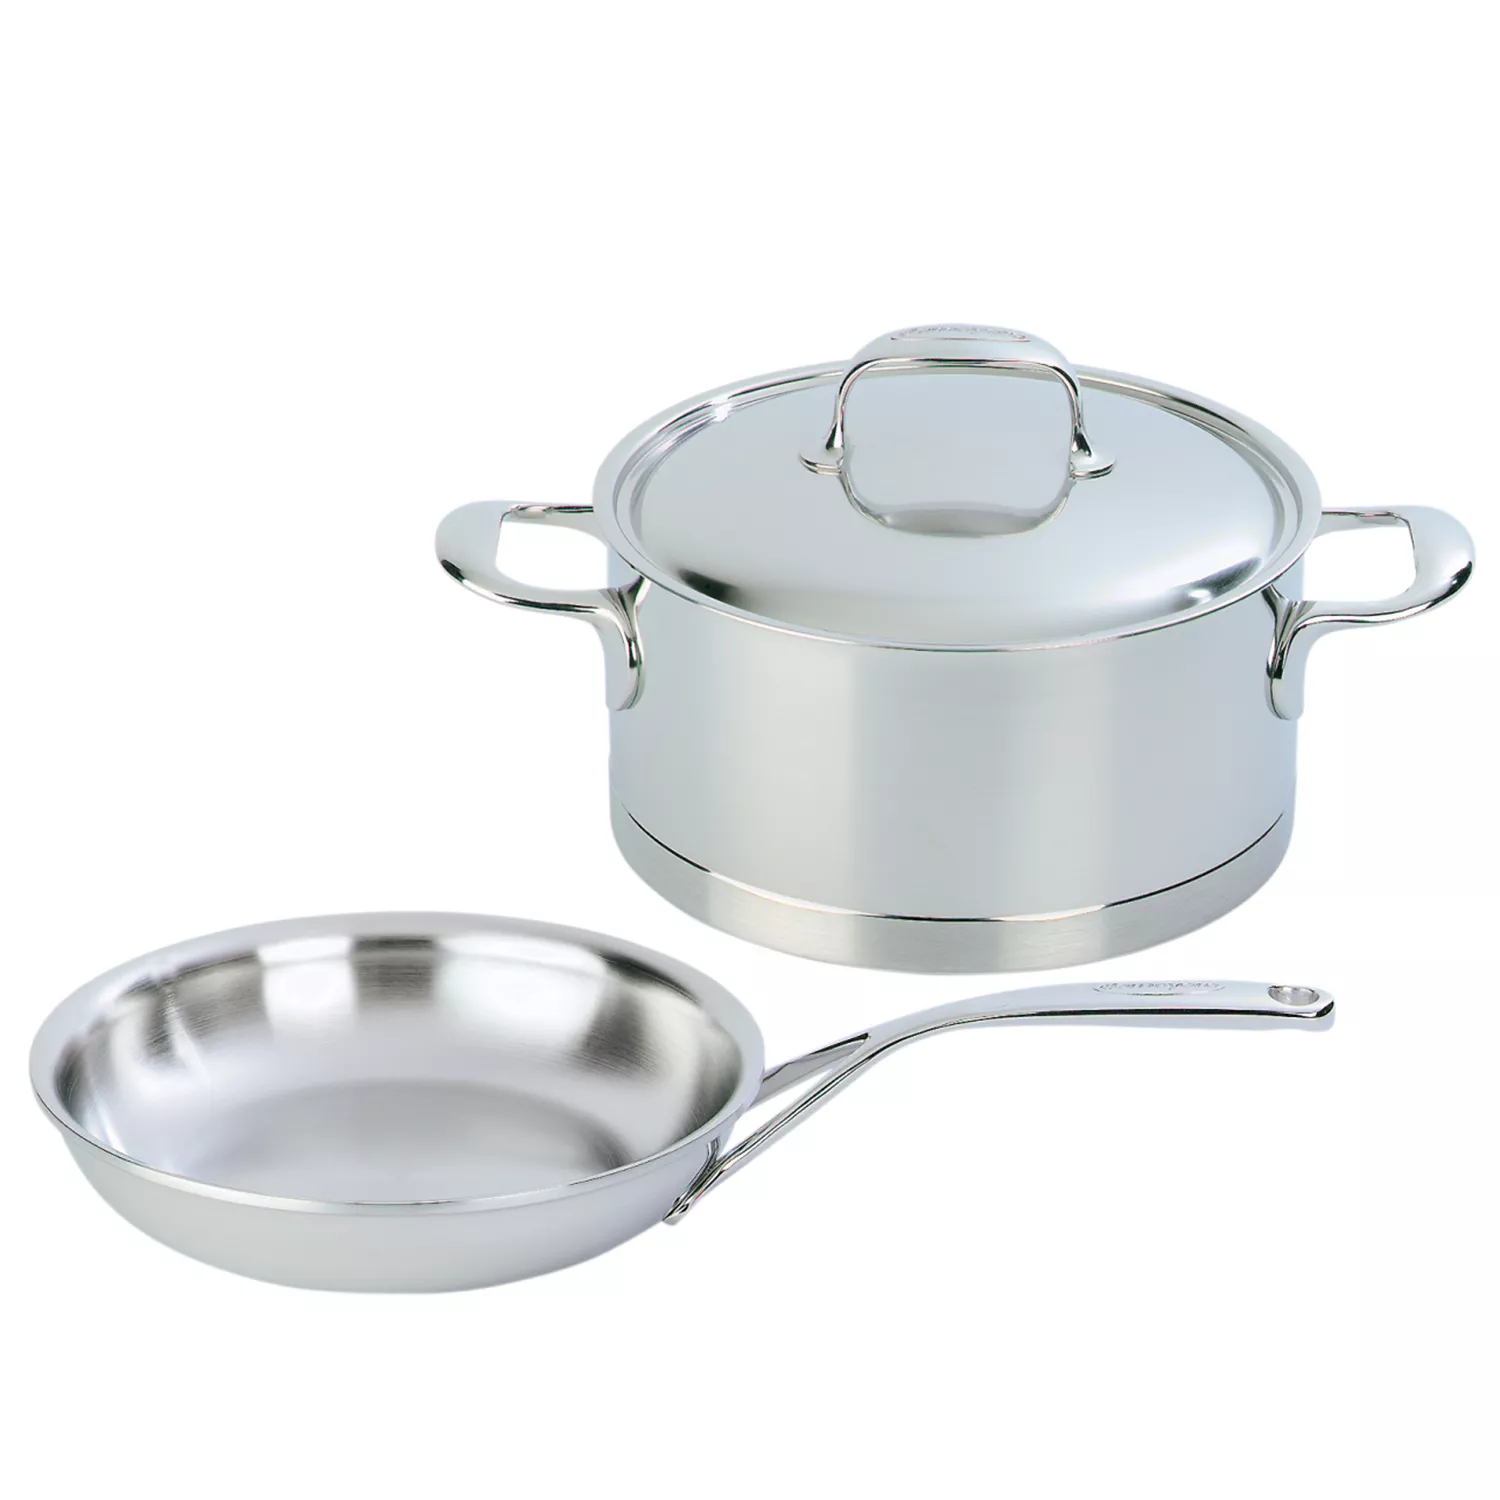 3-Piece Stainless Steel Frying Pan Set